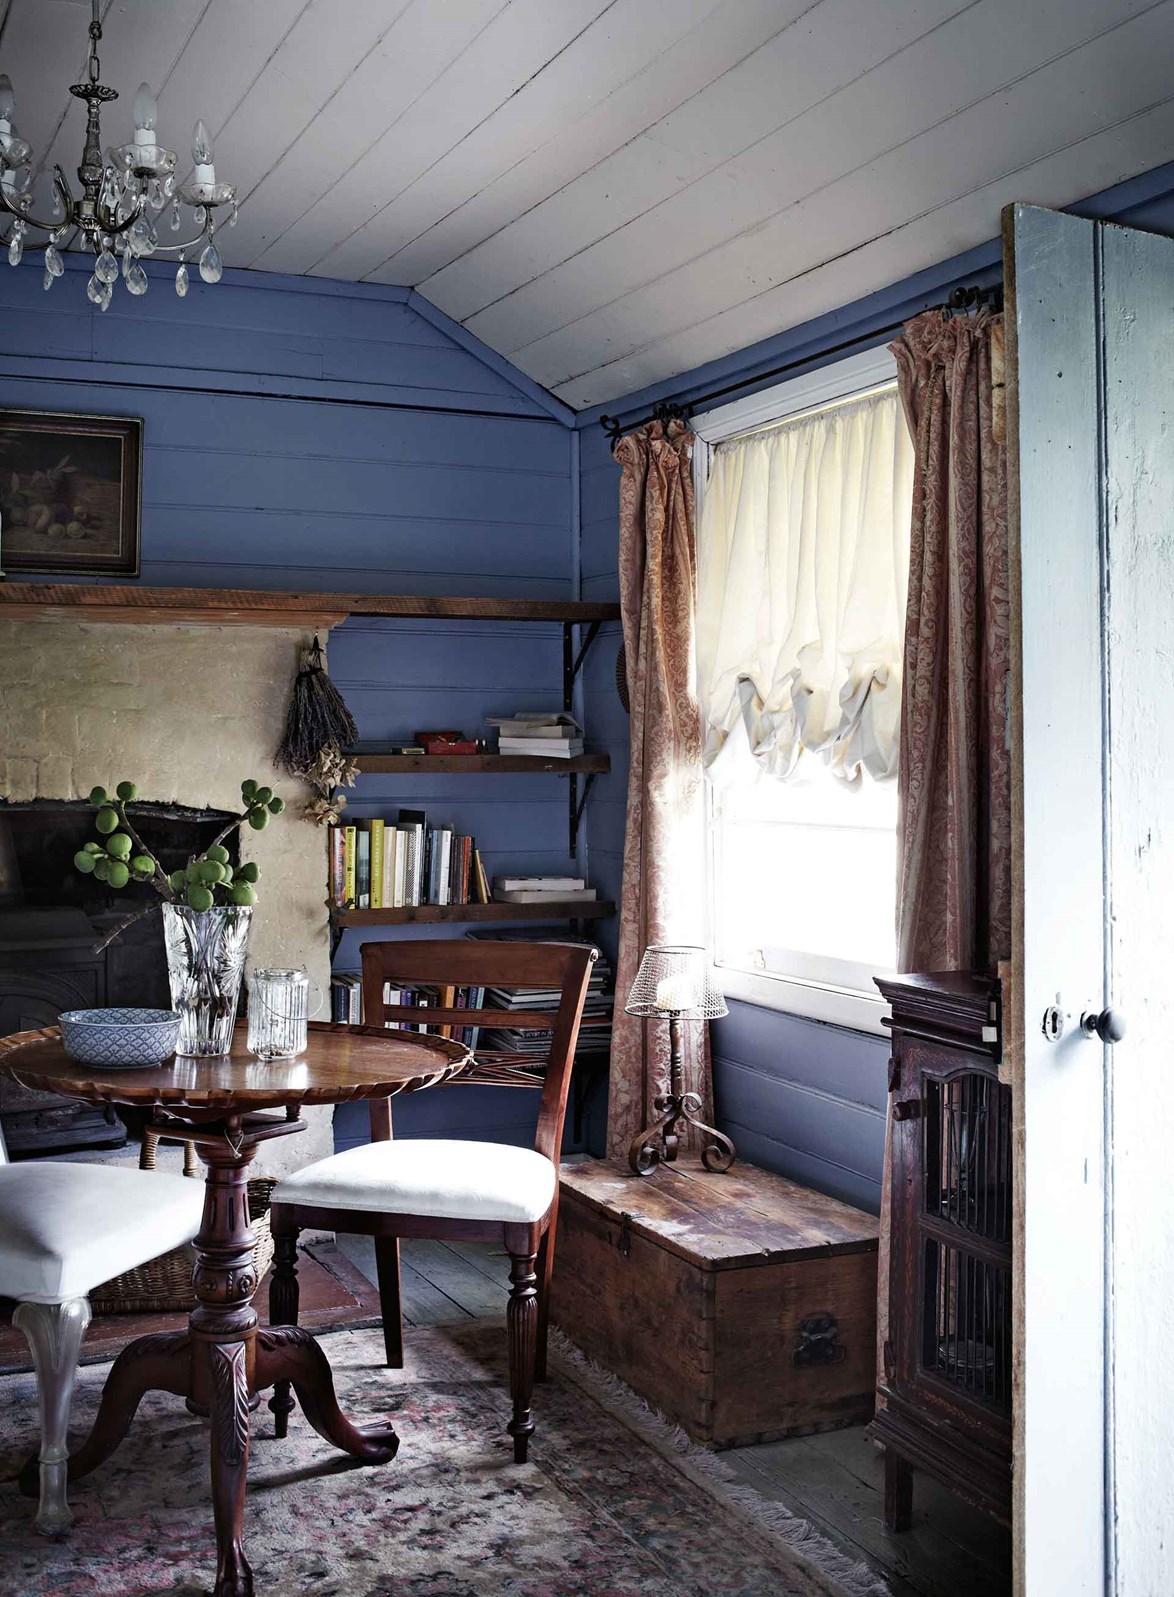 This [quaint cottage](https://www.homestolove.com.au/historic-cottage-renovation-13047|target="_blank") is believed to be the oldest home in Rydal, a picturesque village near Bathurst, NSW. Owner Rosie says the "sweet shape of the house" was what attracted her to the cottage, despite the state of disrepair she initially found it in. While extensive renovations have breathed new life into the interior, Rosie enjoys the garden most. "Being out in the garden … watching the roses open - there's nothing more joyous," she says.